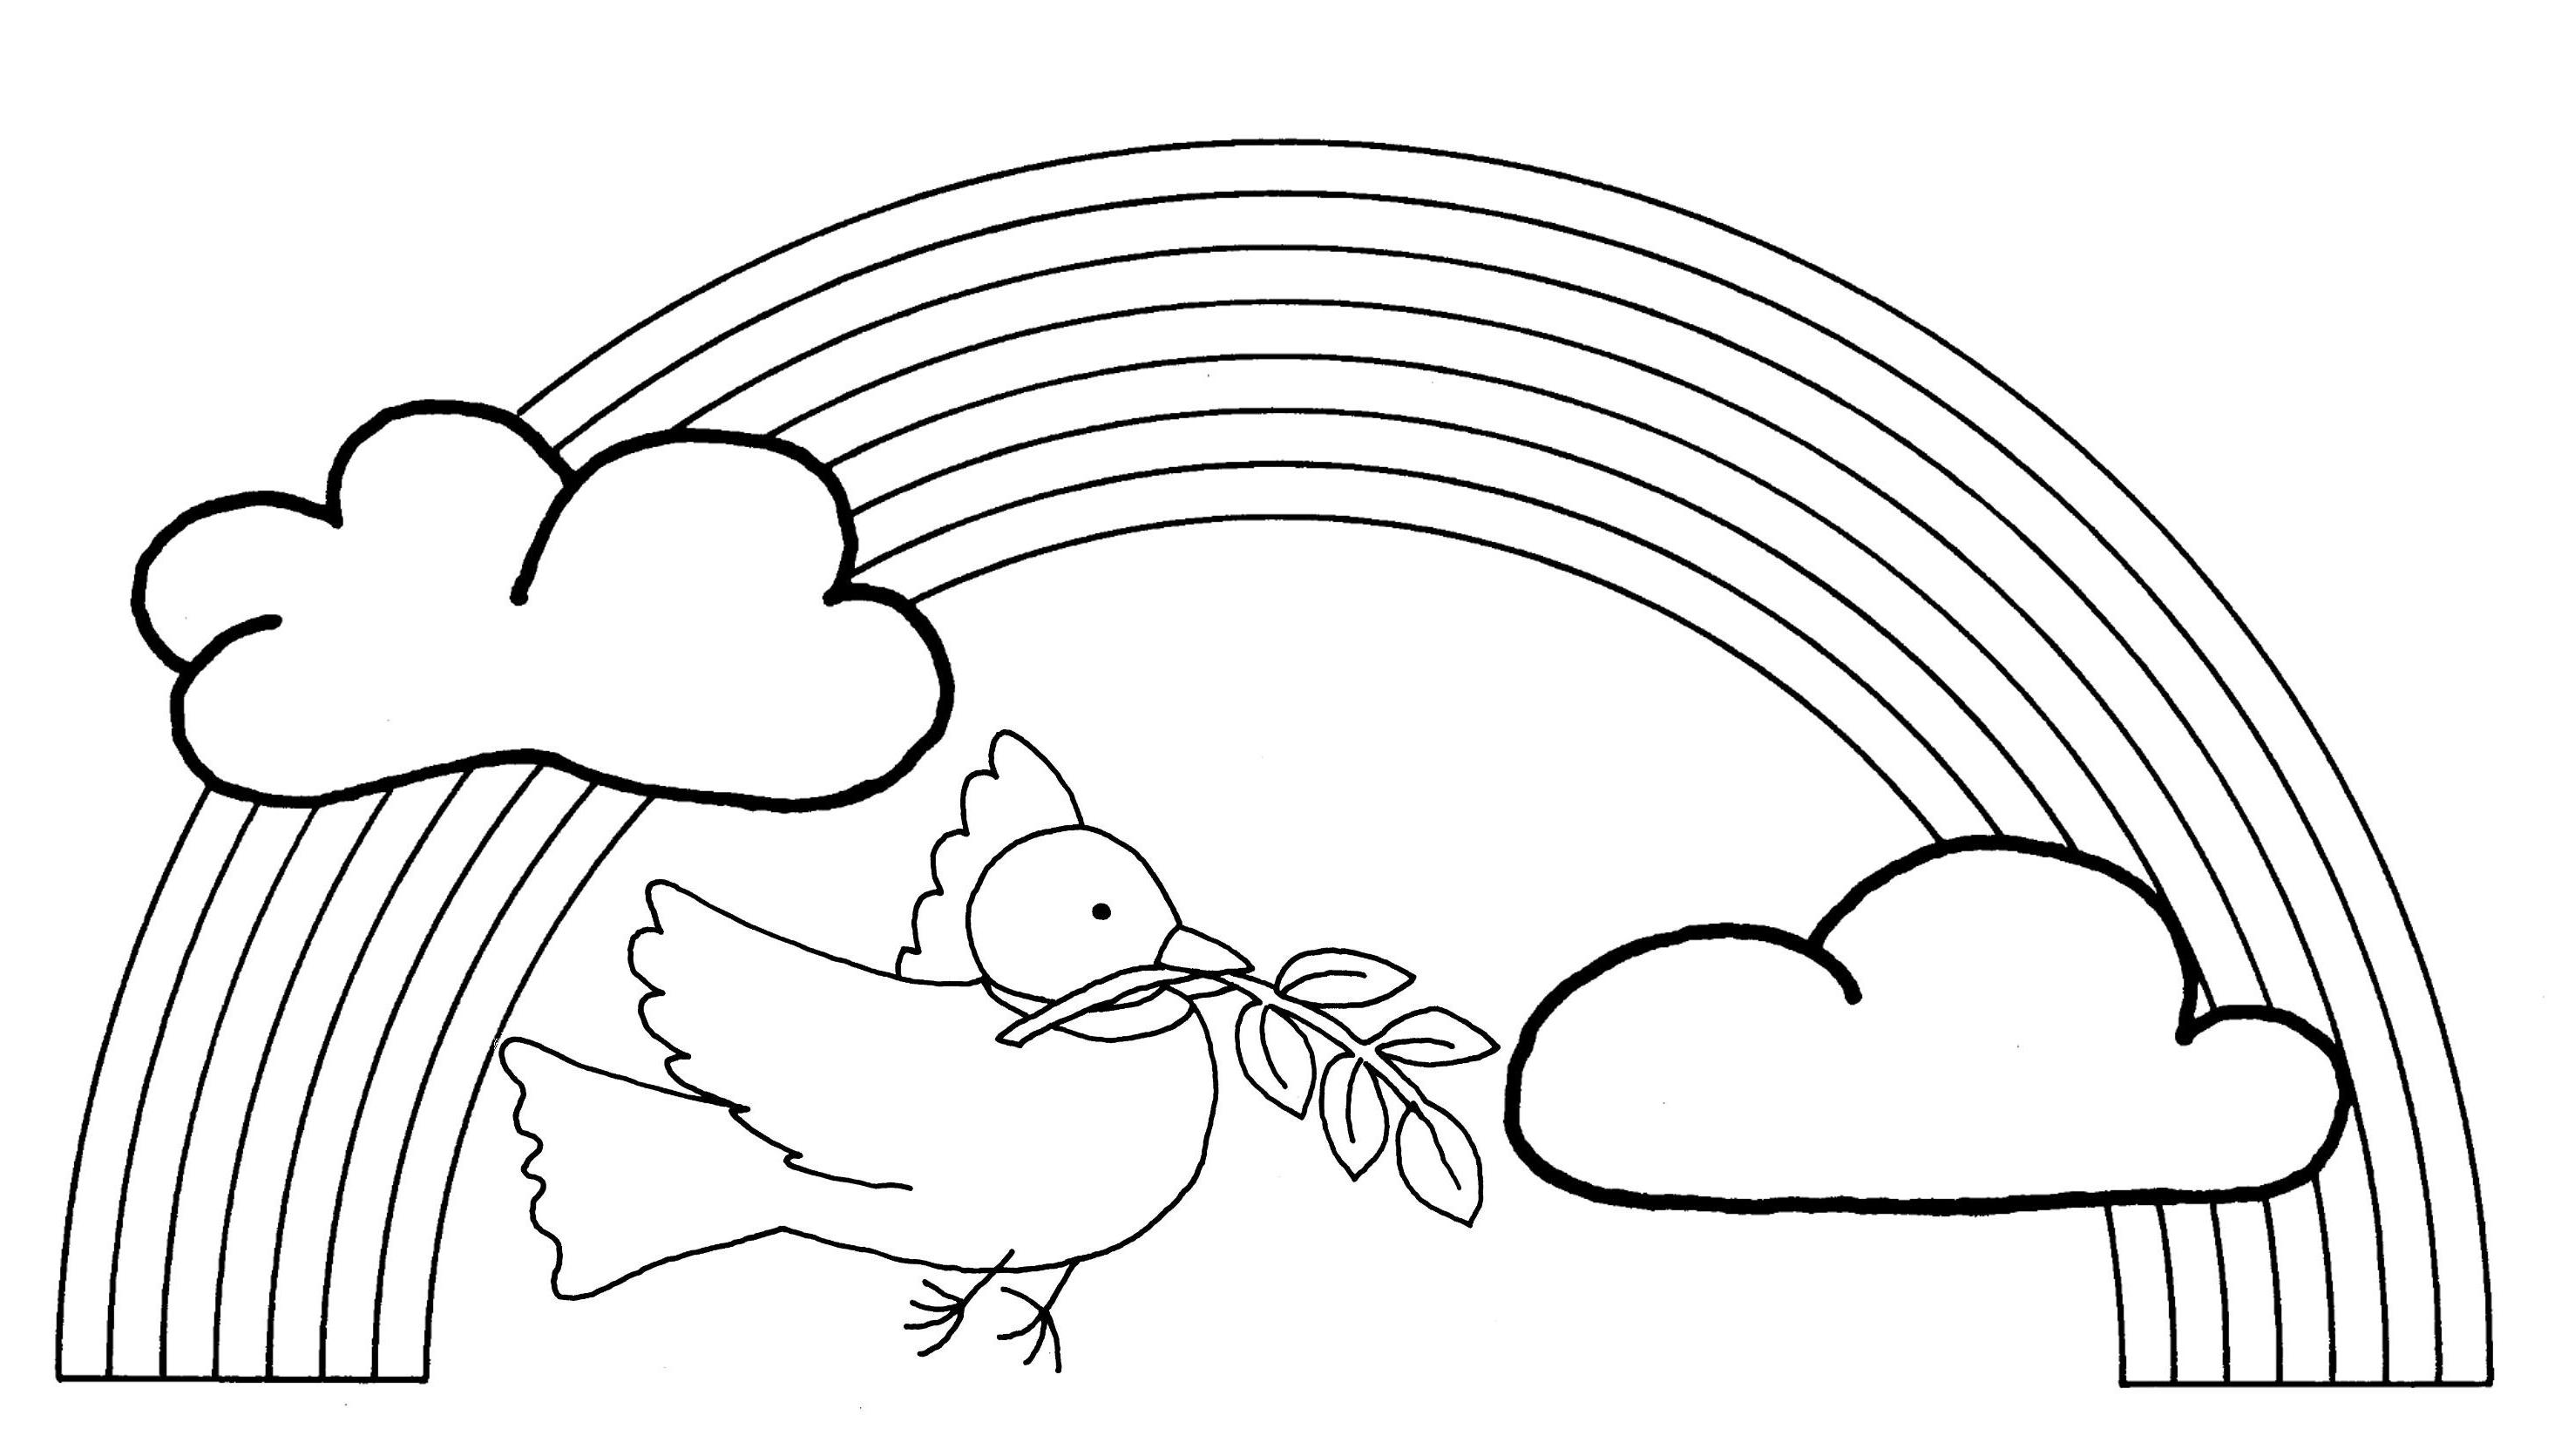 Drawings Rainbow Nature Page 2 Printable Coloring Pages